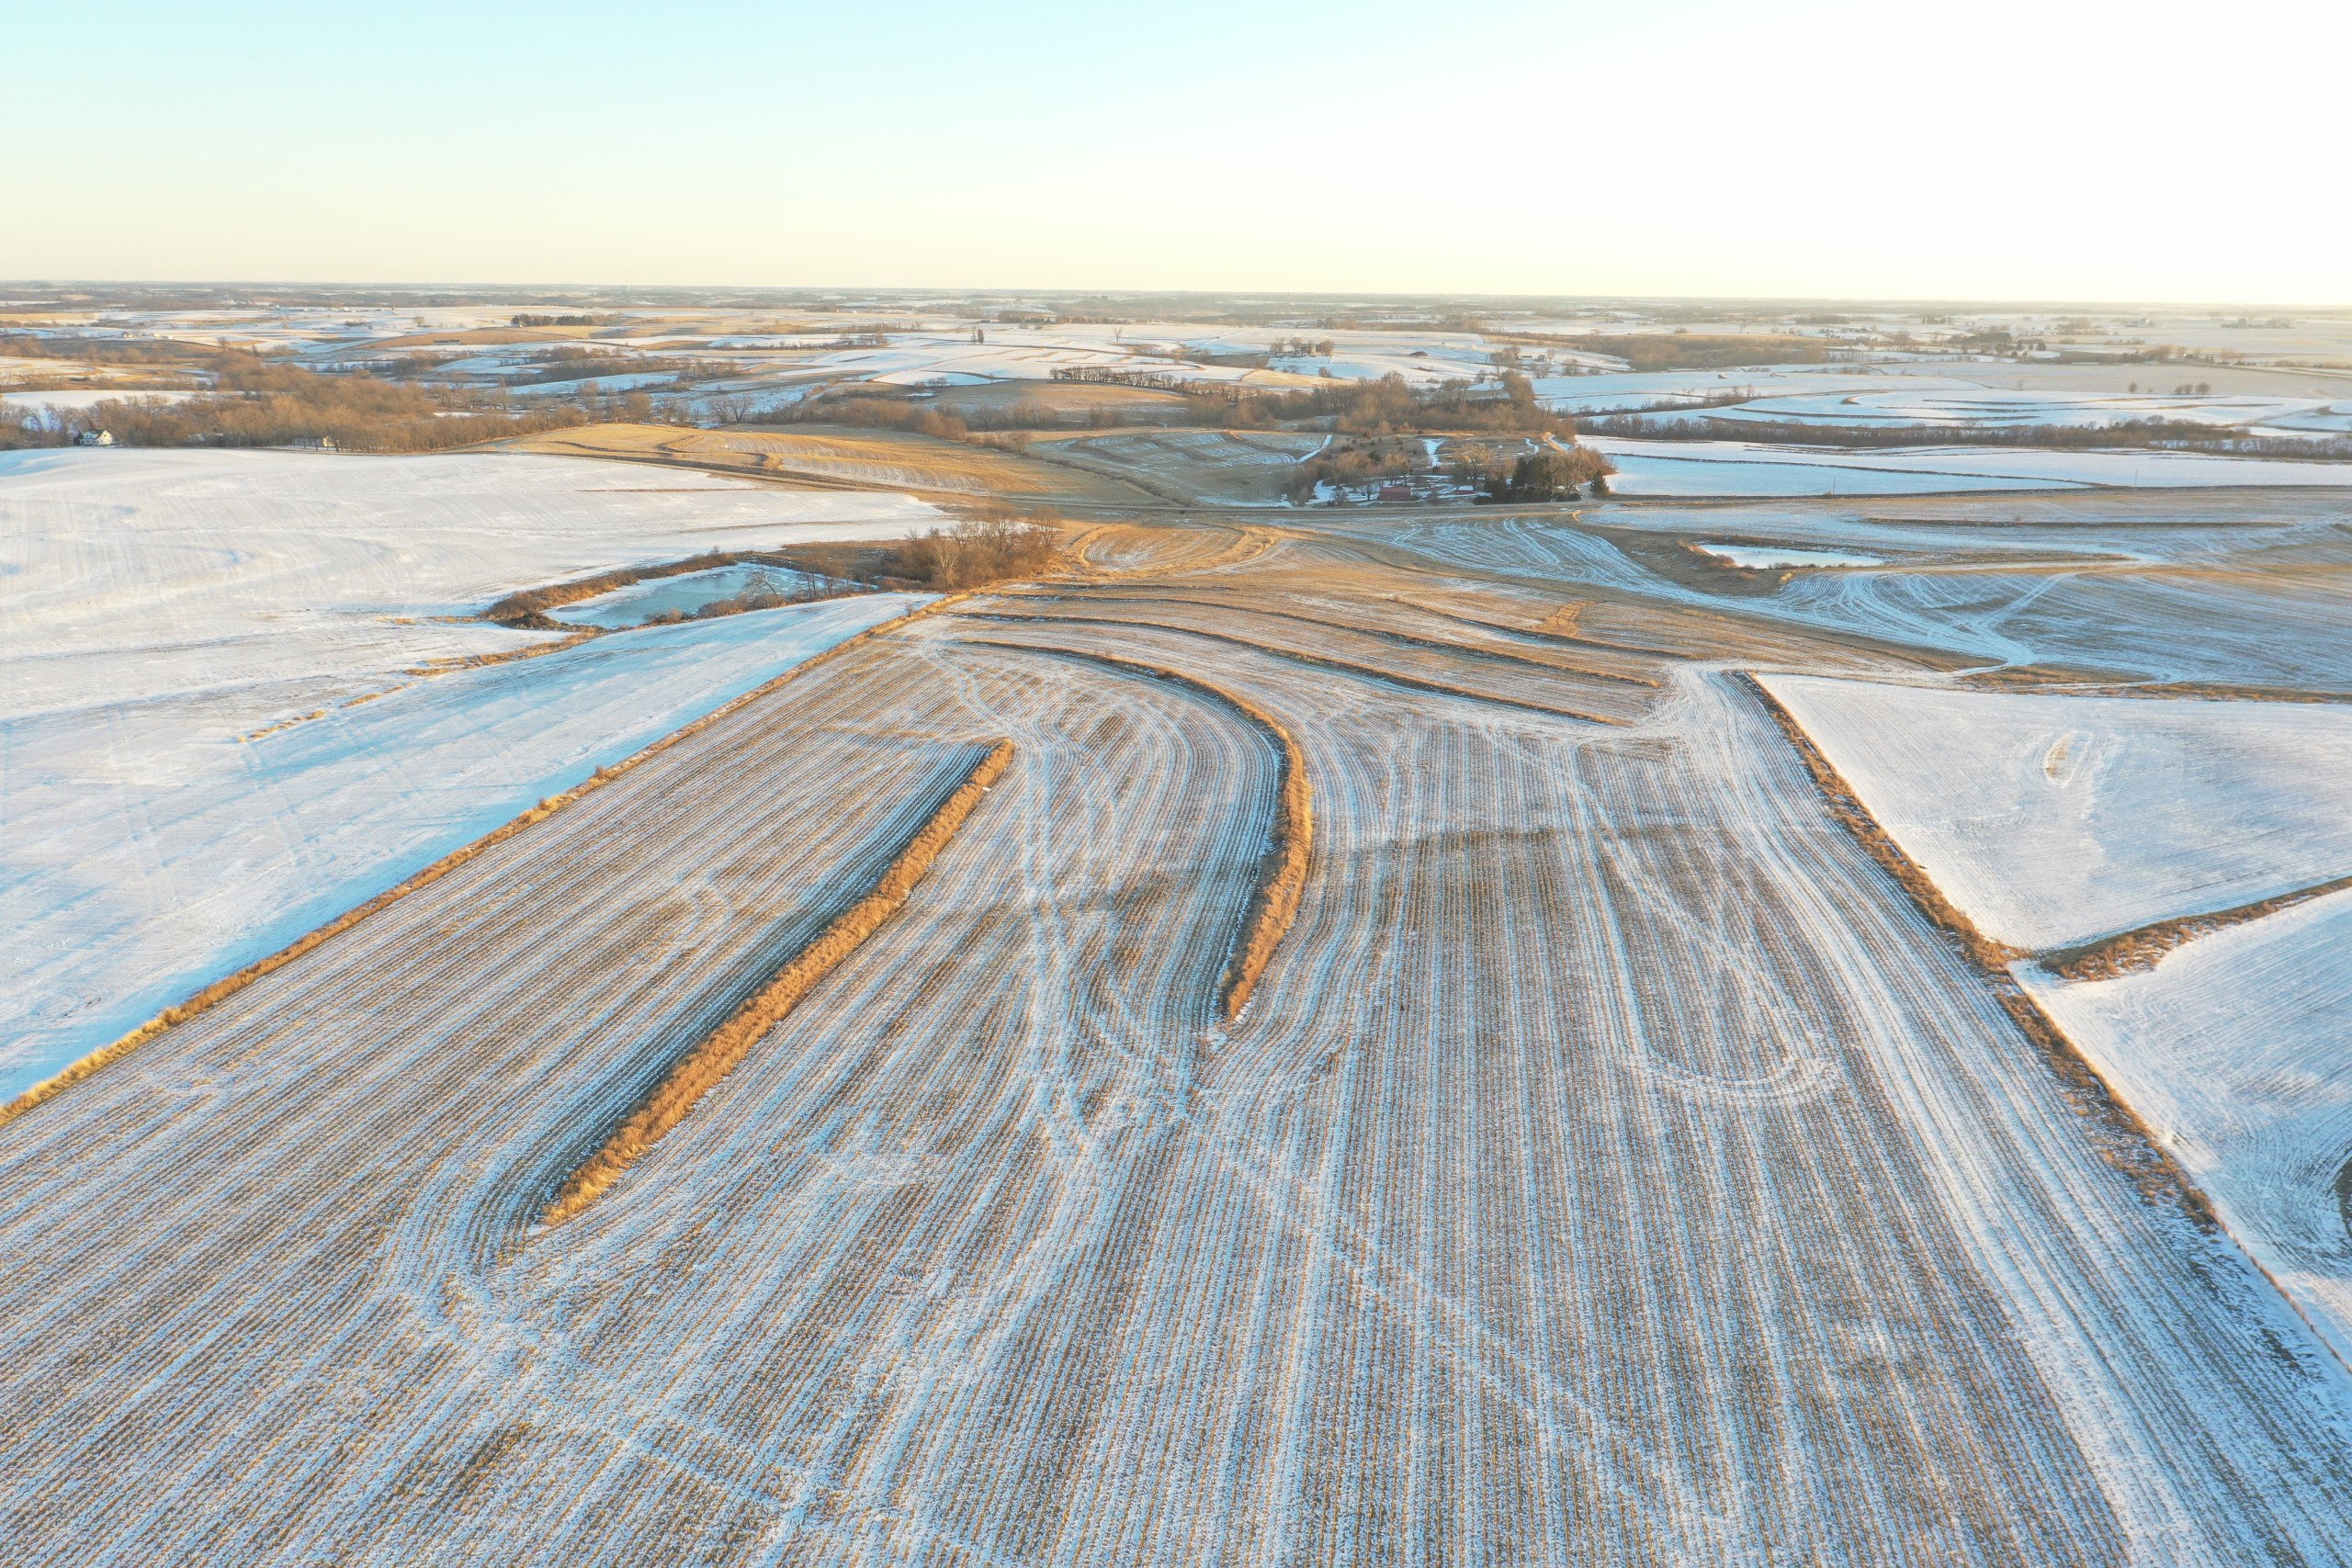 auctions-land-marion-county-iowa-75-acres-listing-number-16639-DJI_0008-1.jpg